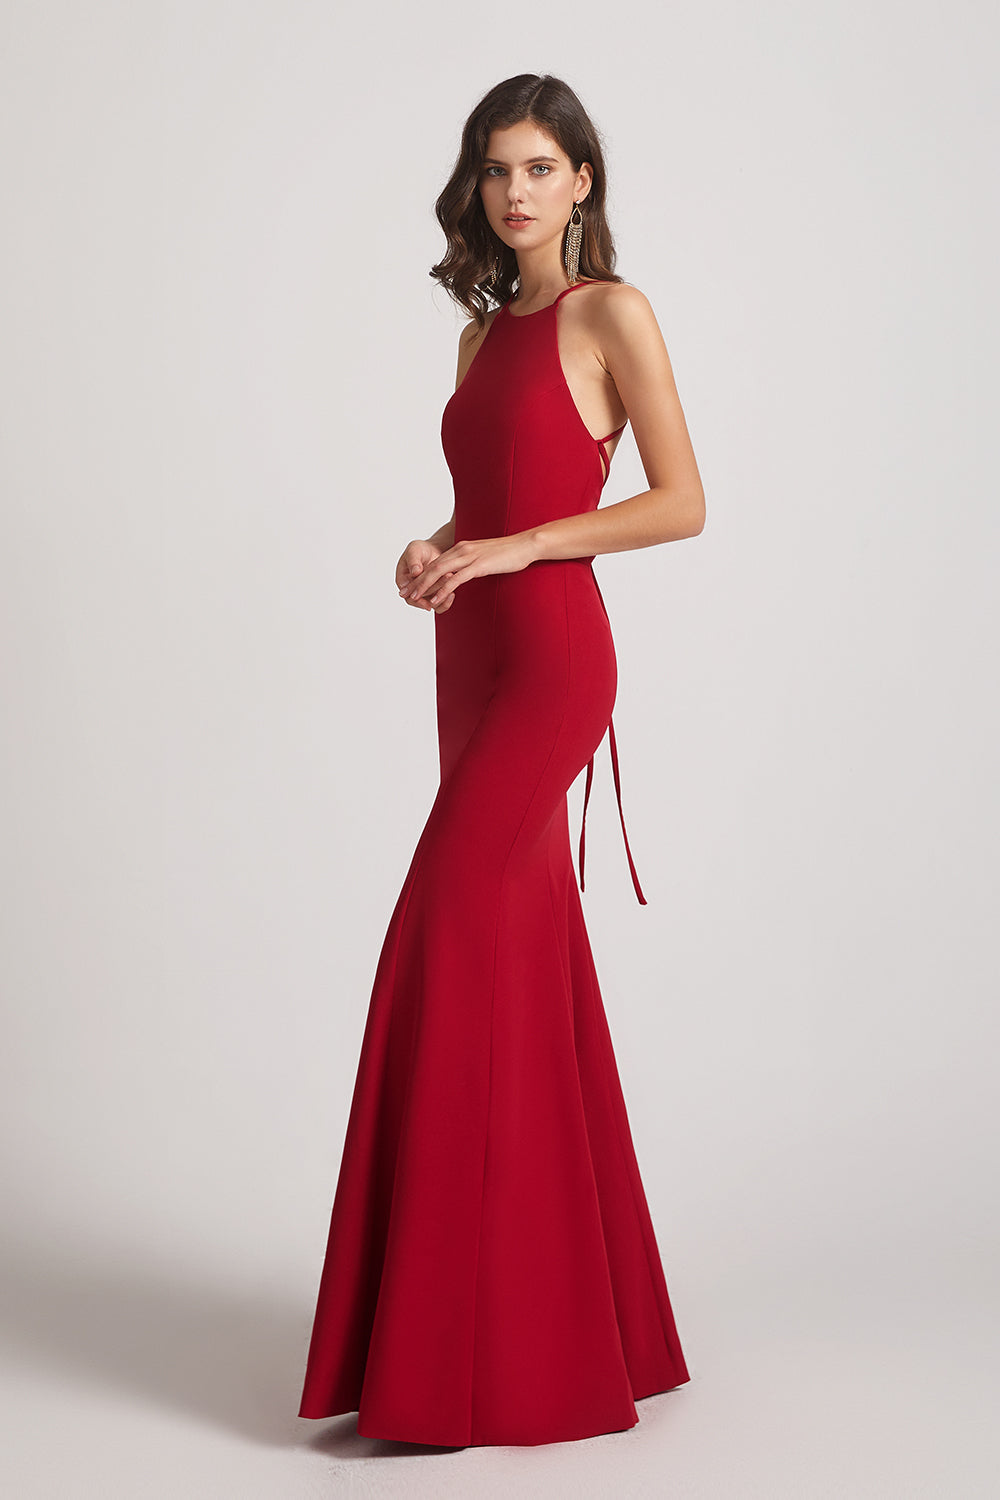 sexy red long mermaid maid of honor dresses